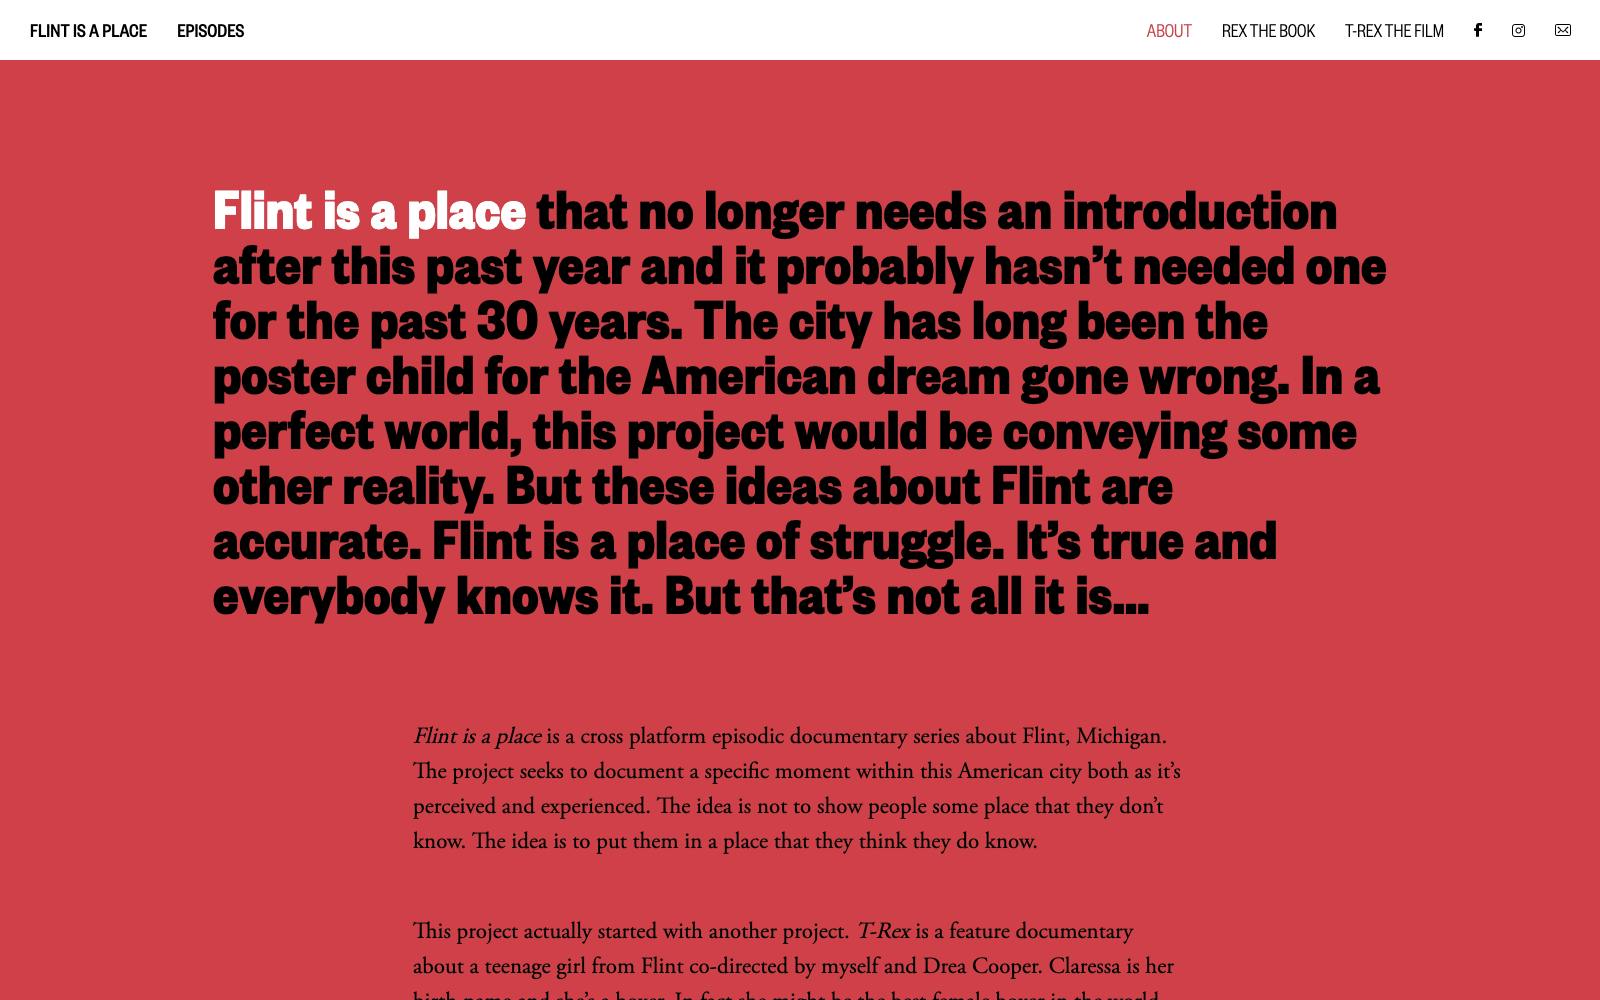 Screenshot of the desktop about page for Flint is a Place.